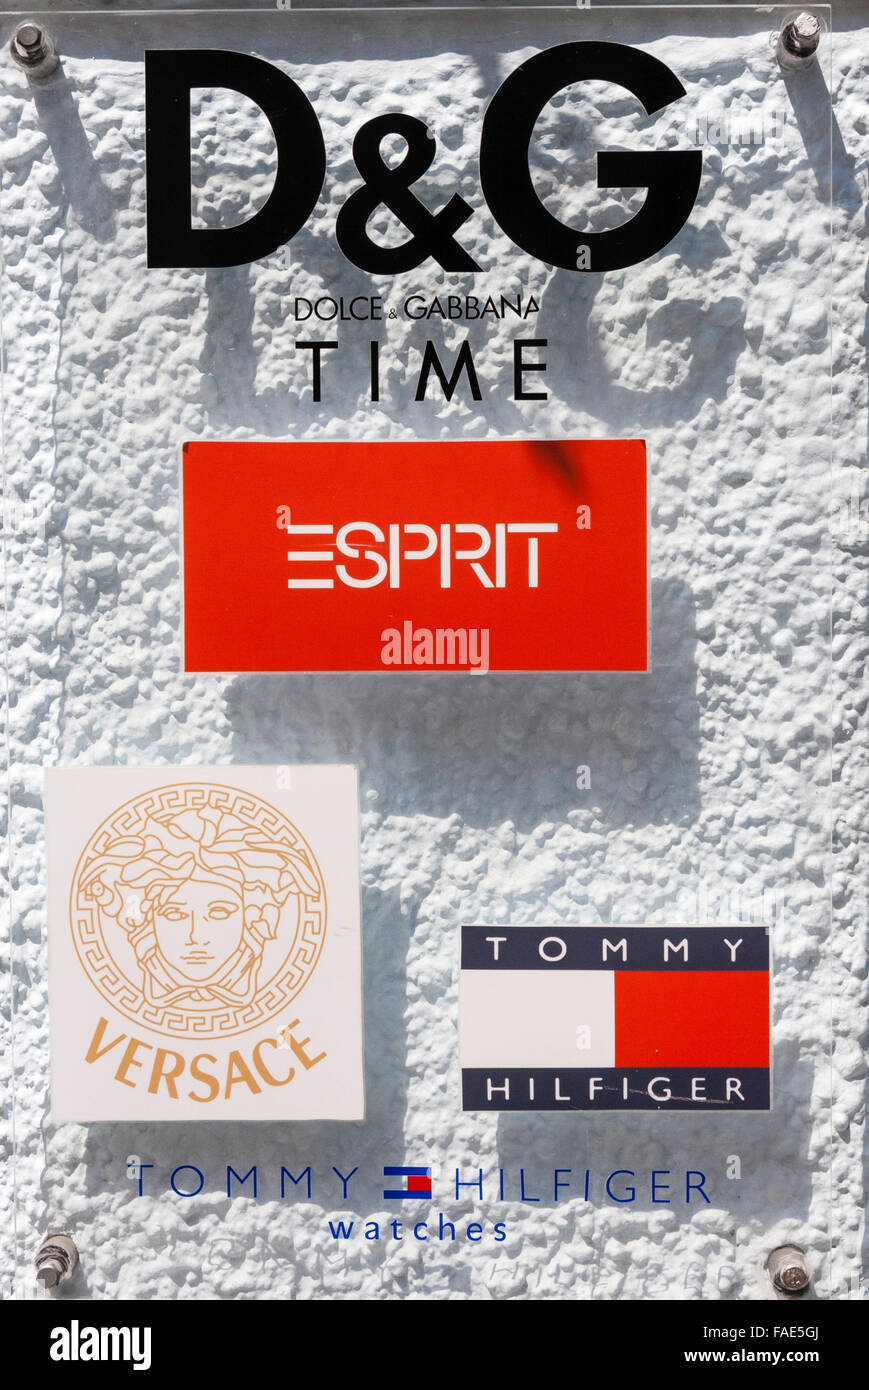 Greece. Plastic transparent sign with various band name logs on, D&G,  Espirit, Versace and 